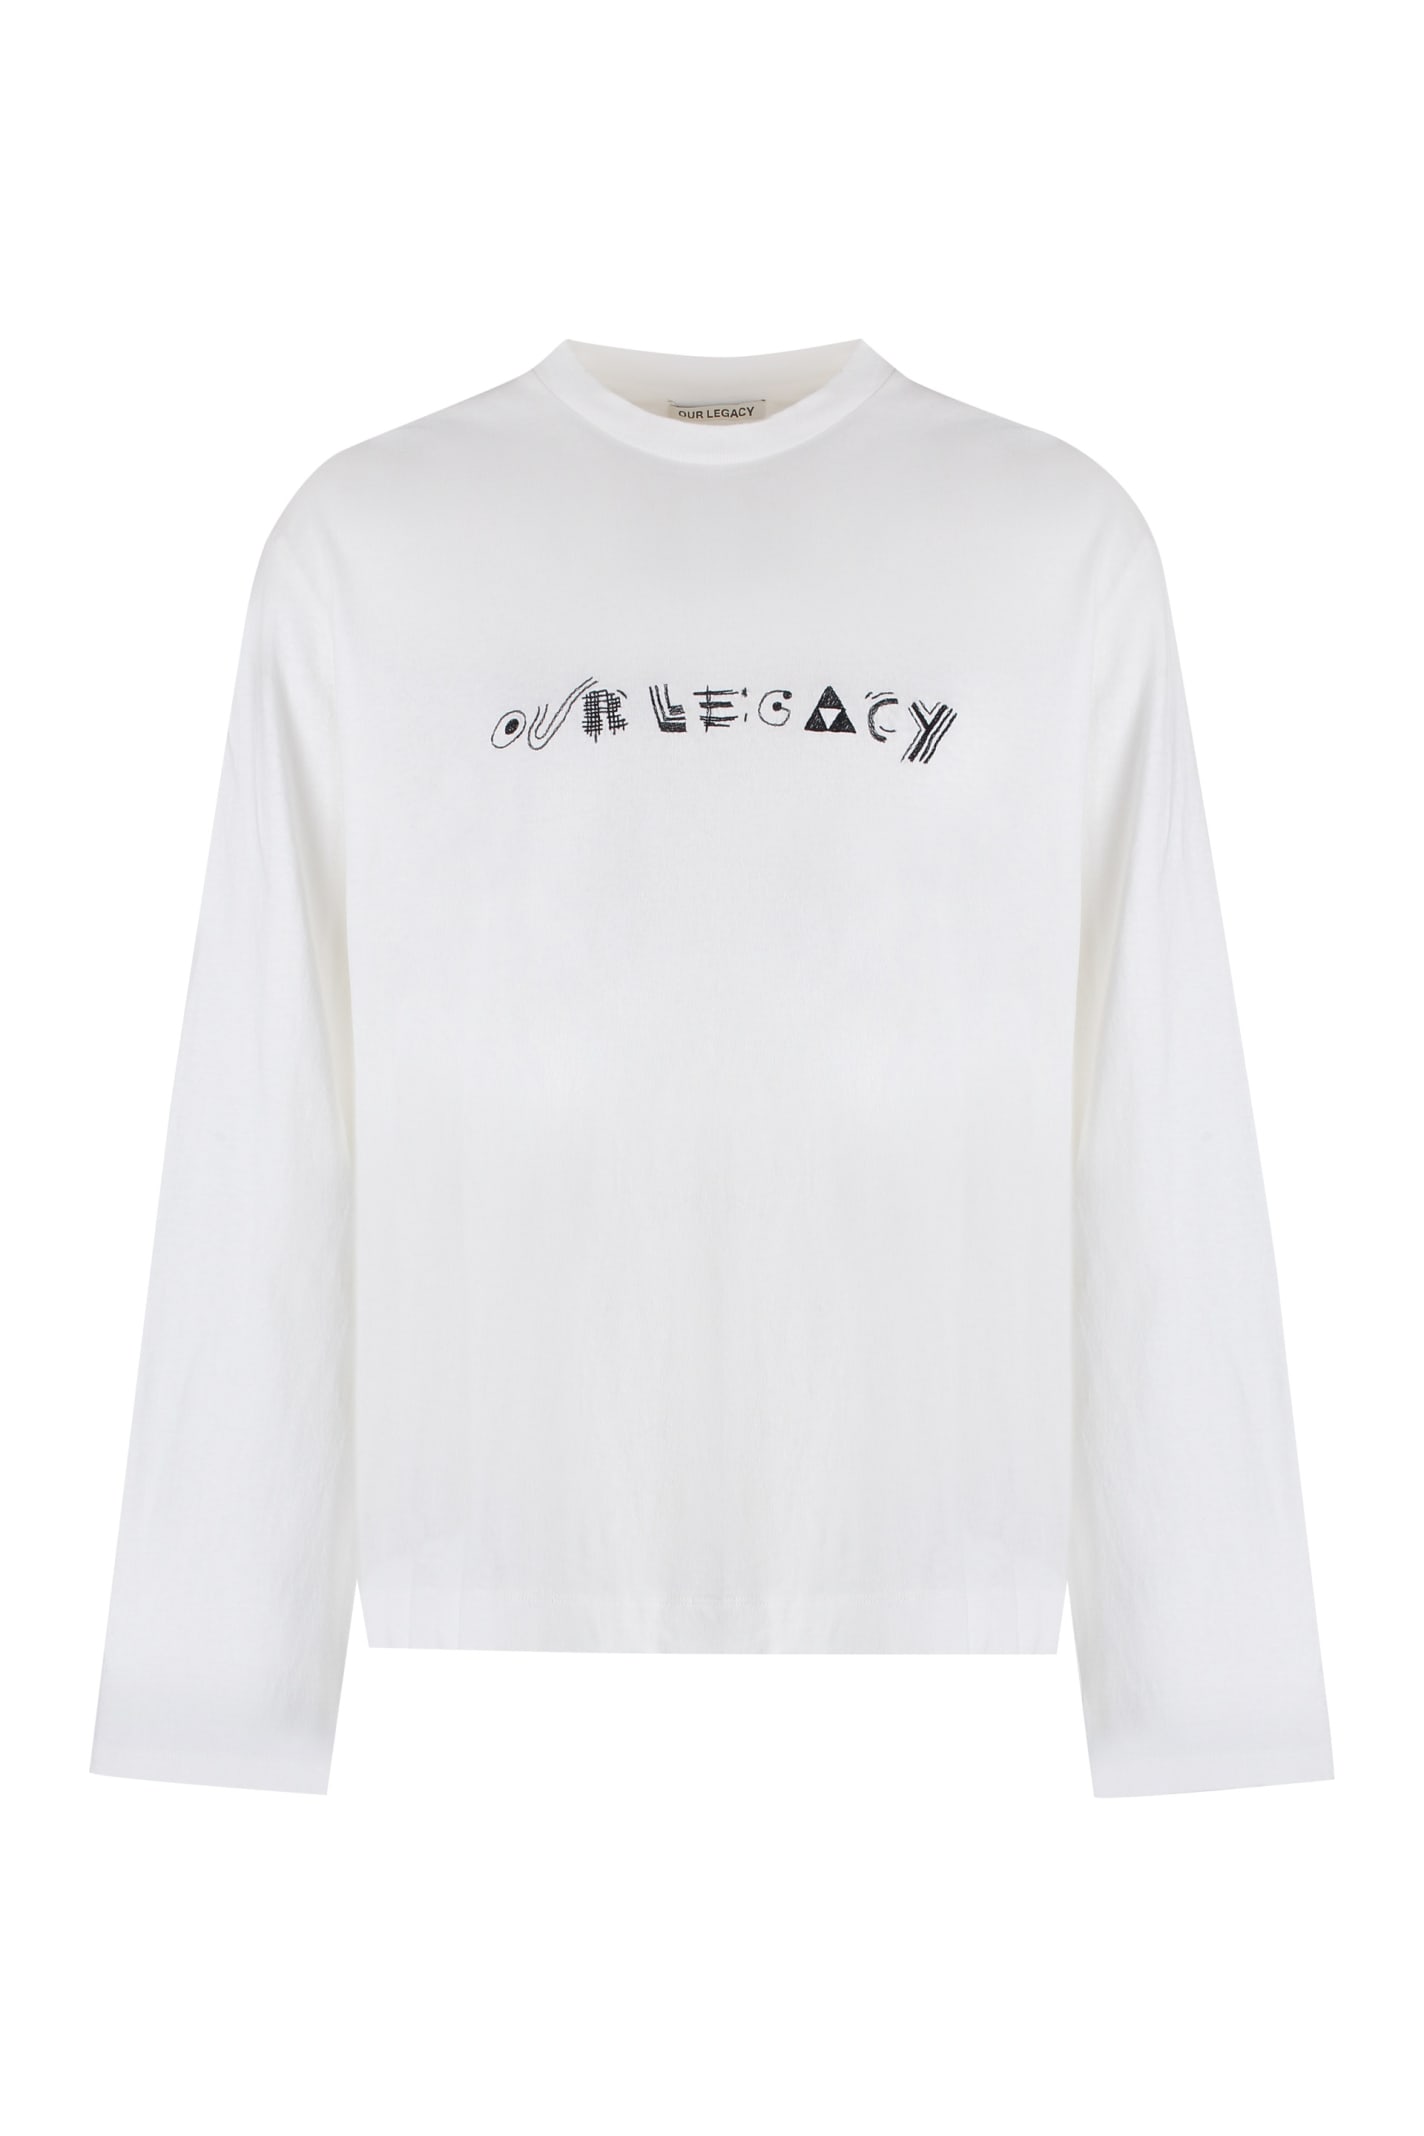 Our Legacy Embroidered Cotton T-shirt